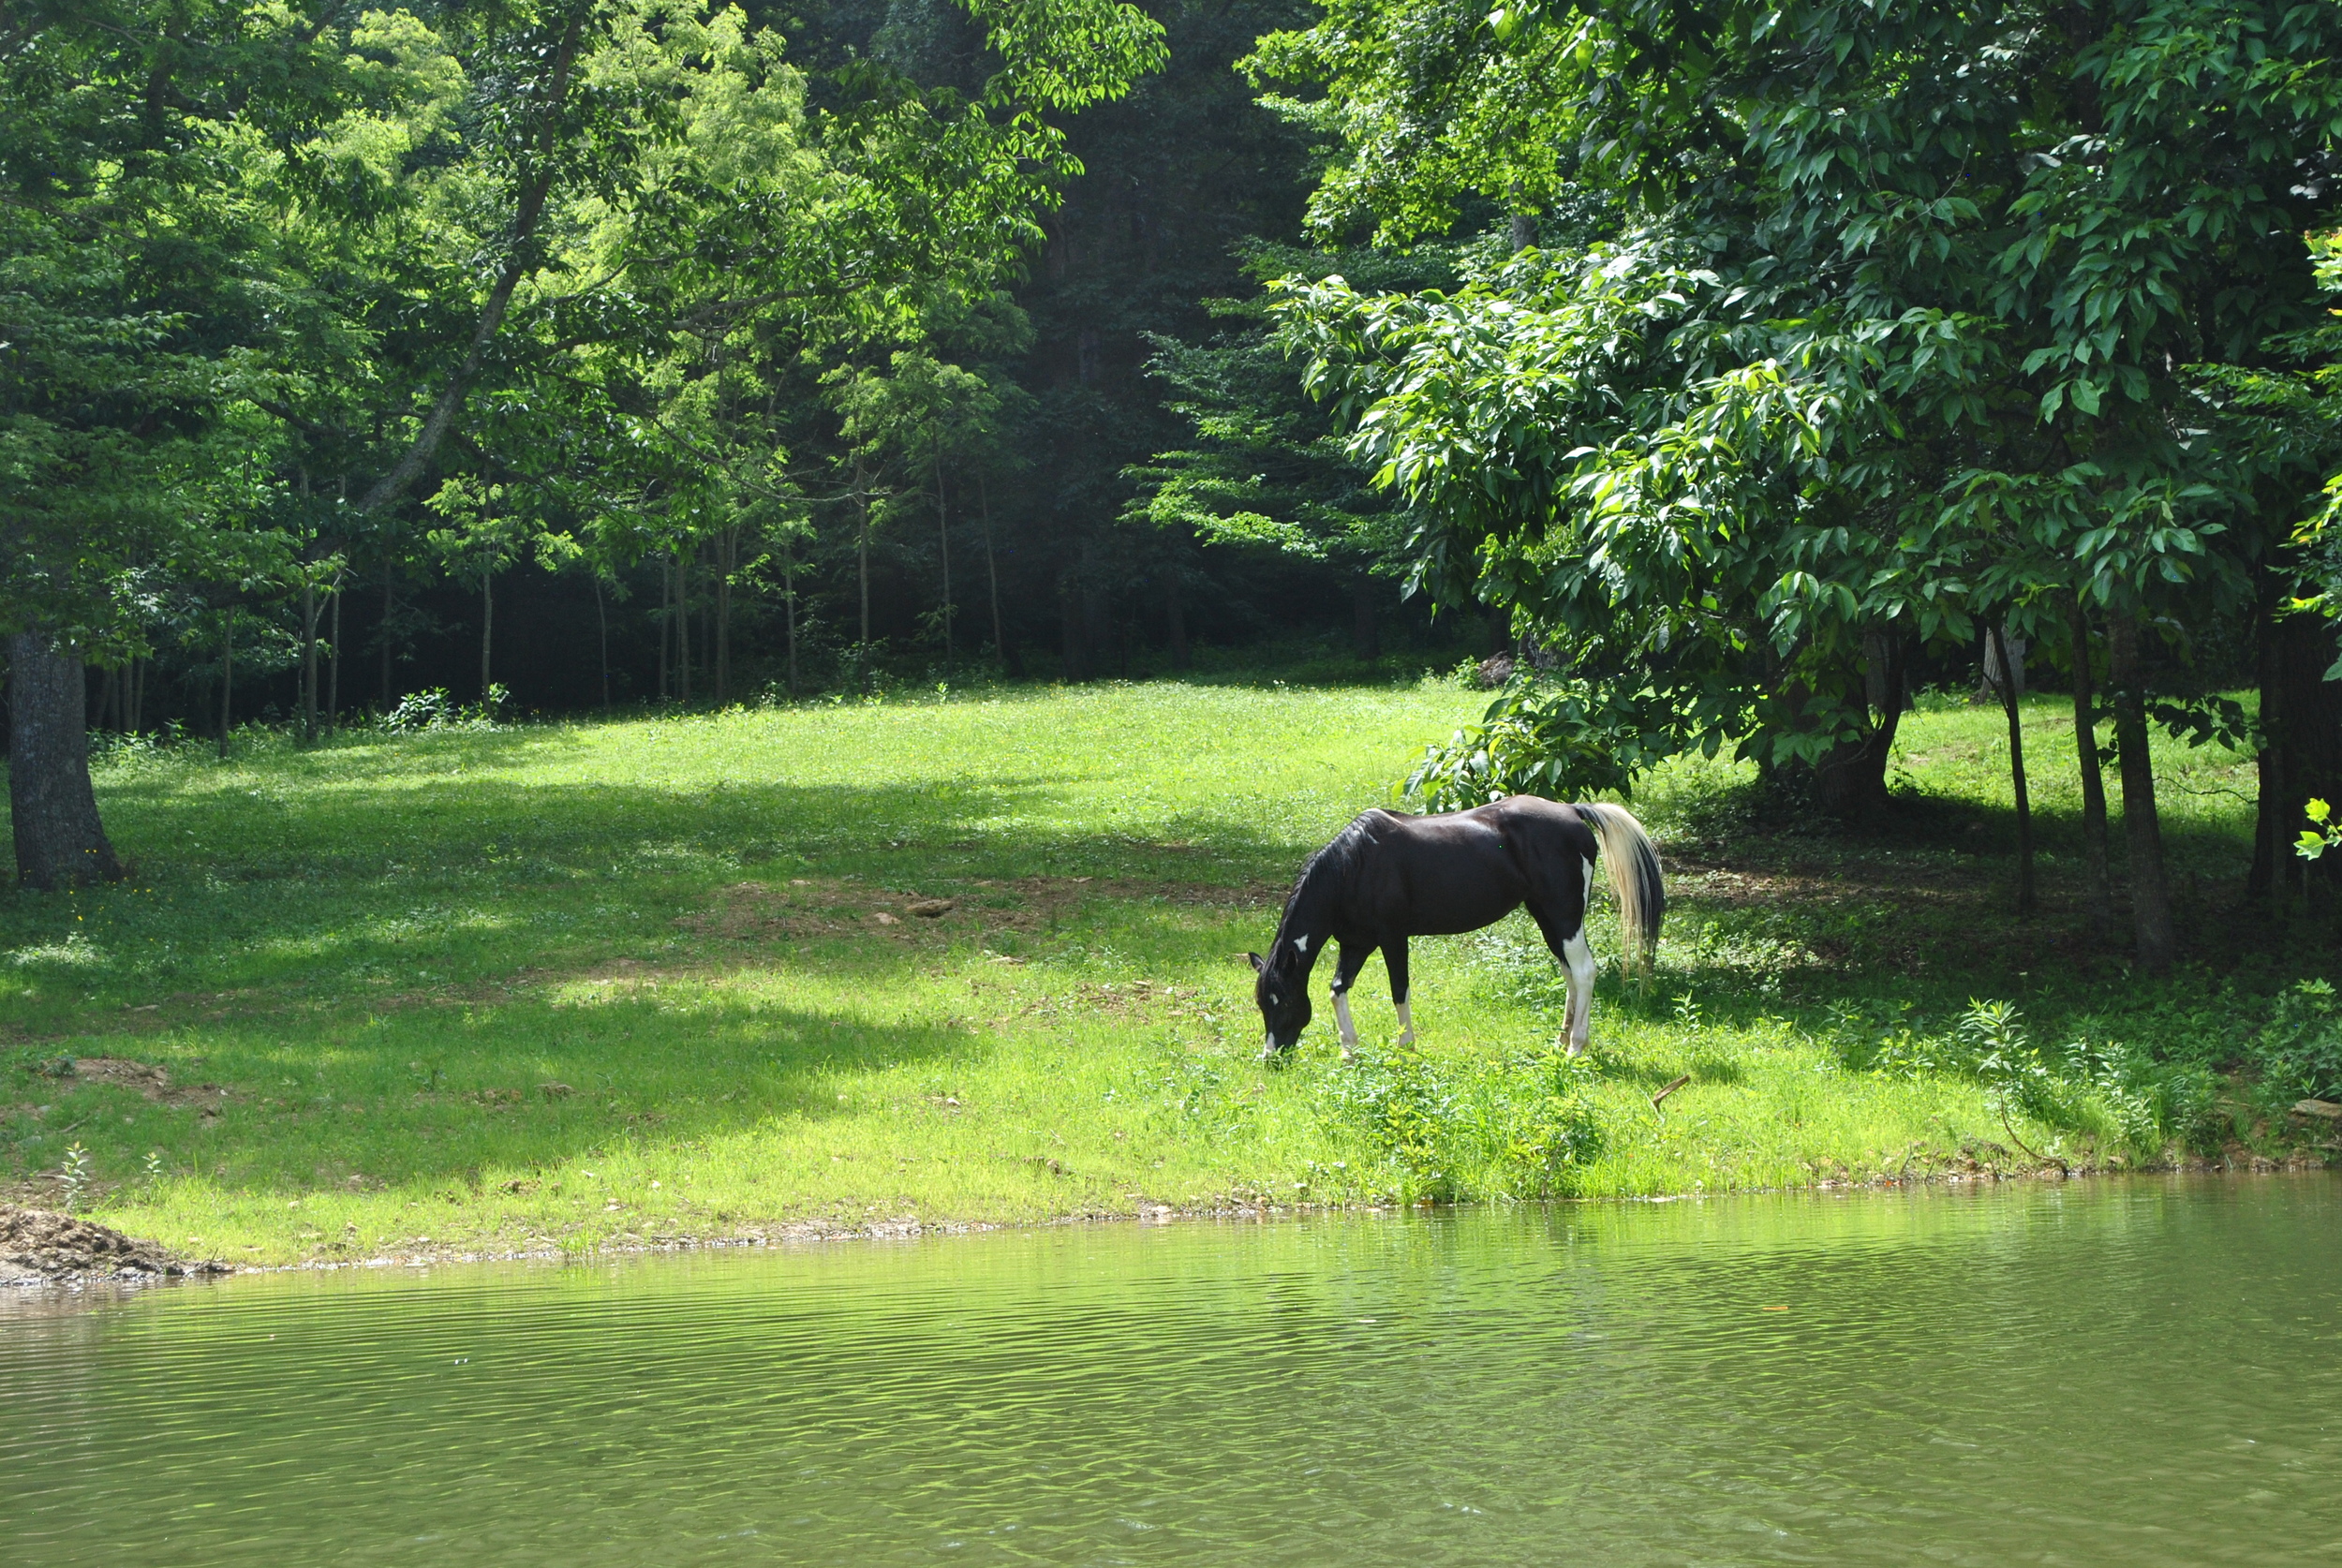   Willet Ponds Farm   More than a place to stay: an Appalachian farm experience  